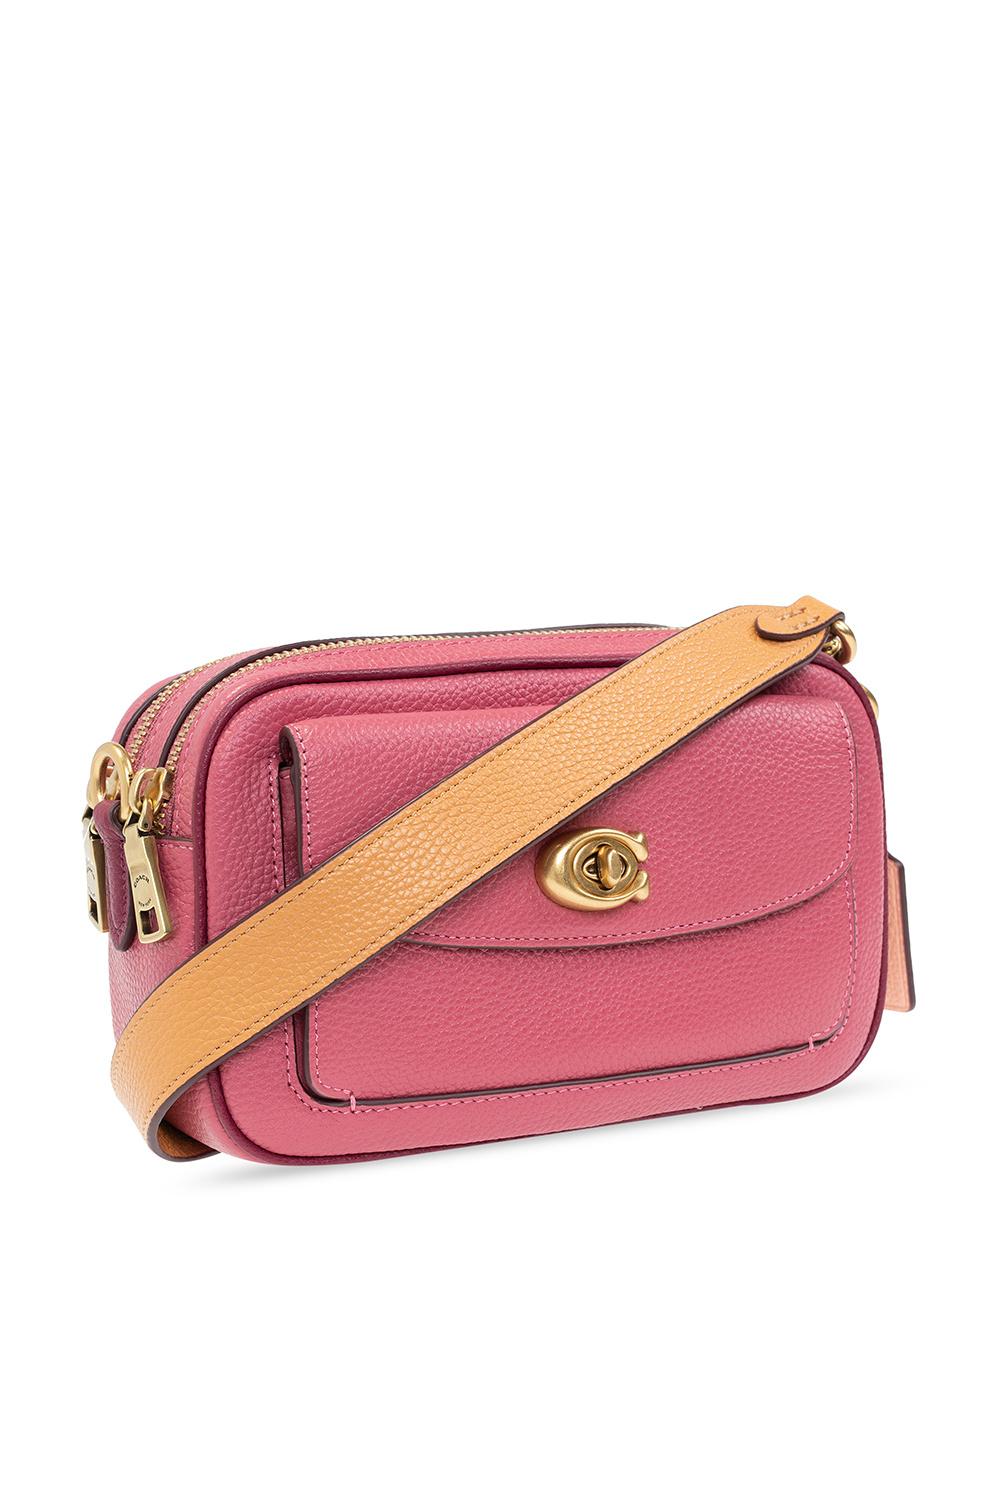 COACH 'willow Camera' Shoulder Bag in Pink | Lyst